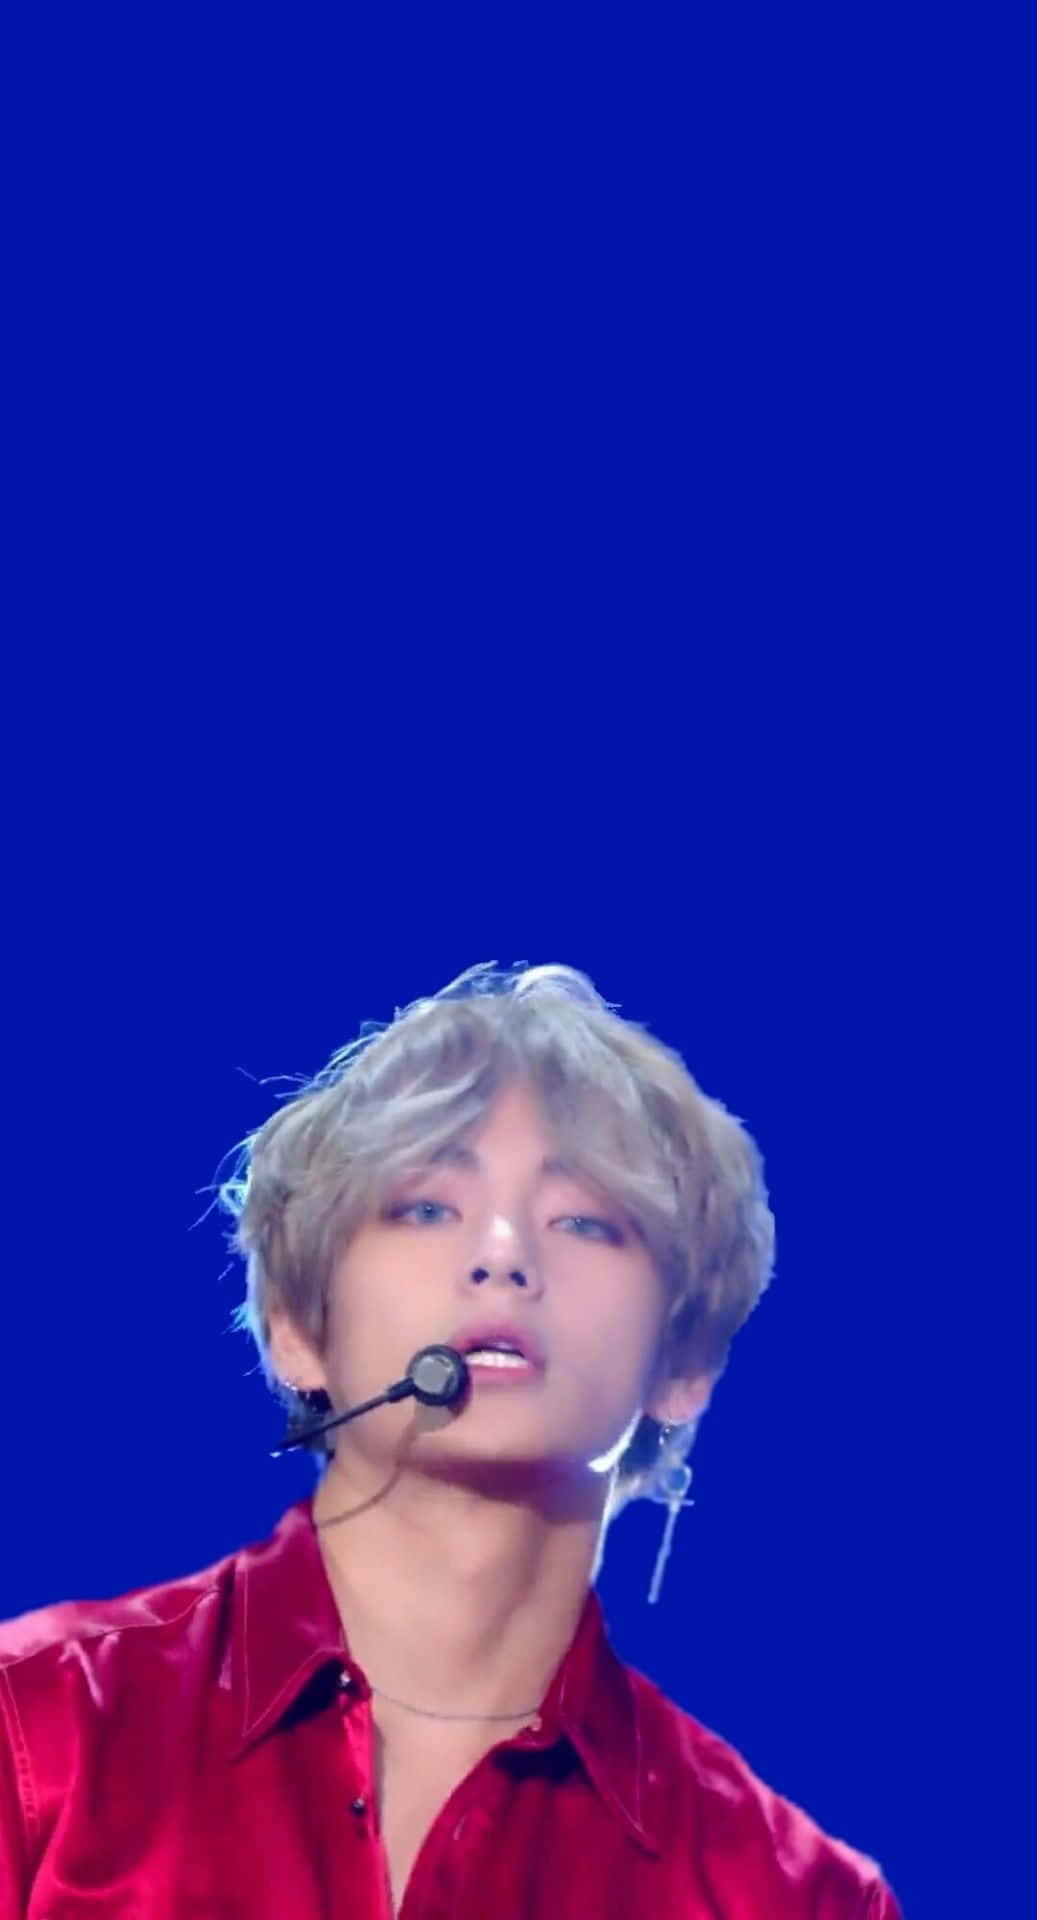 BTS performing live on stage Wallpaper